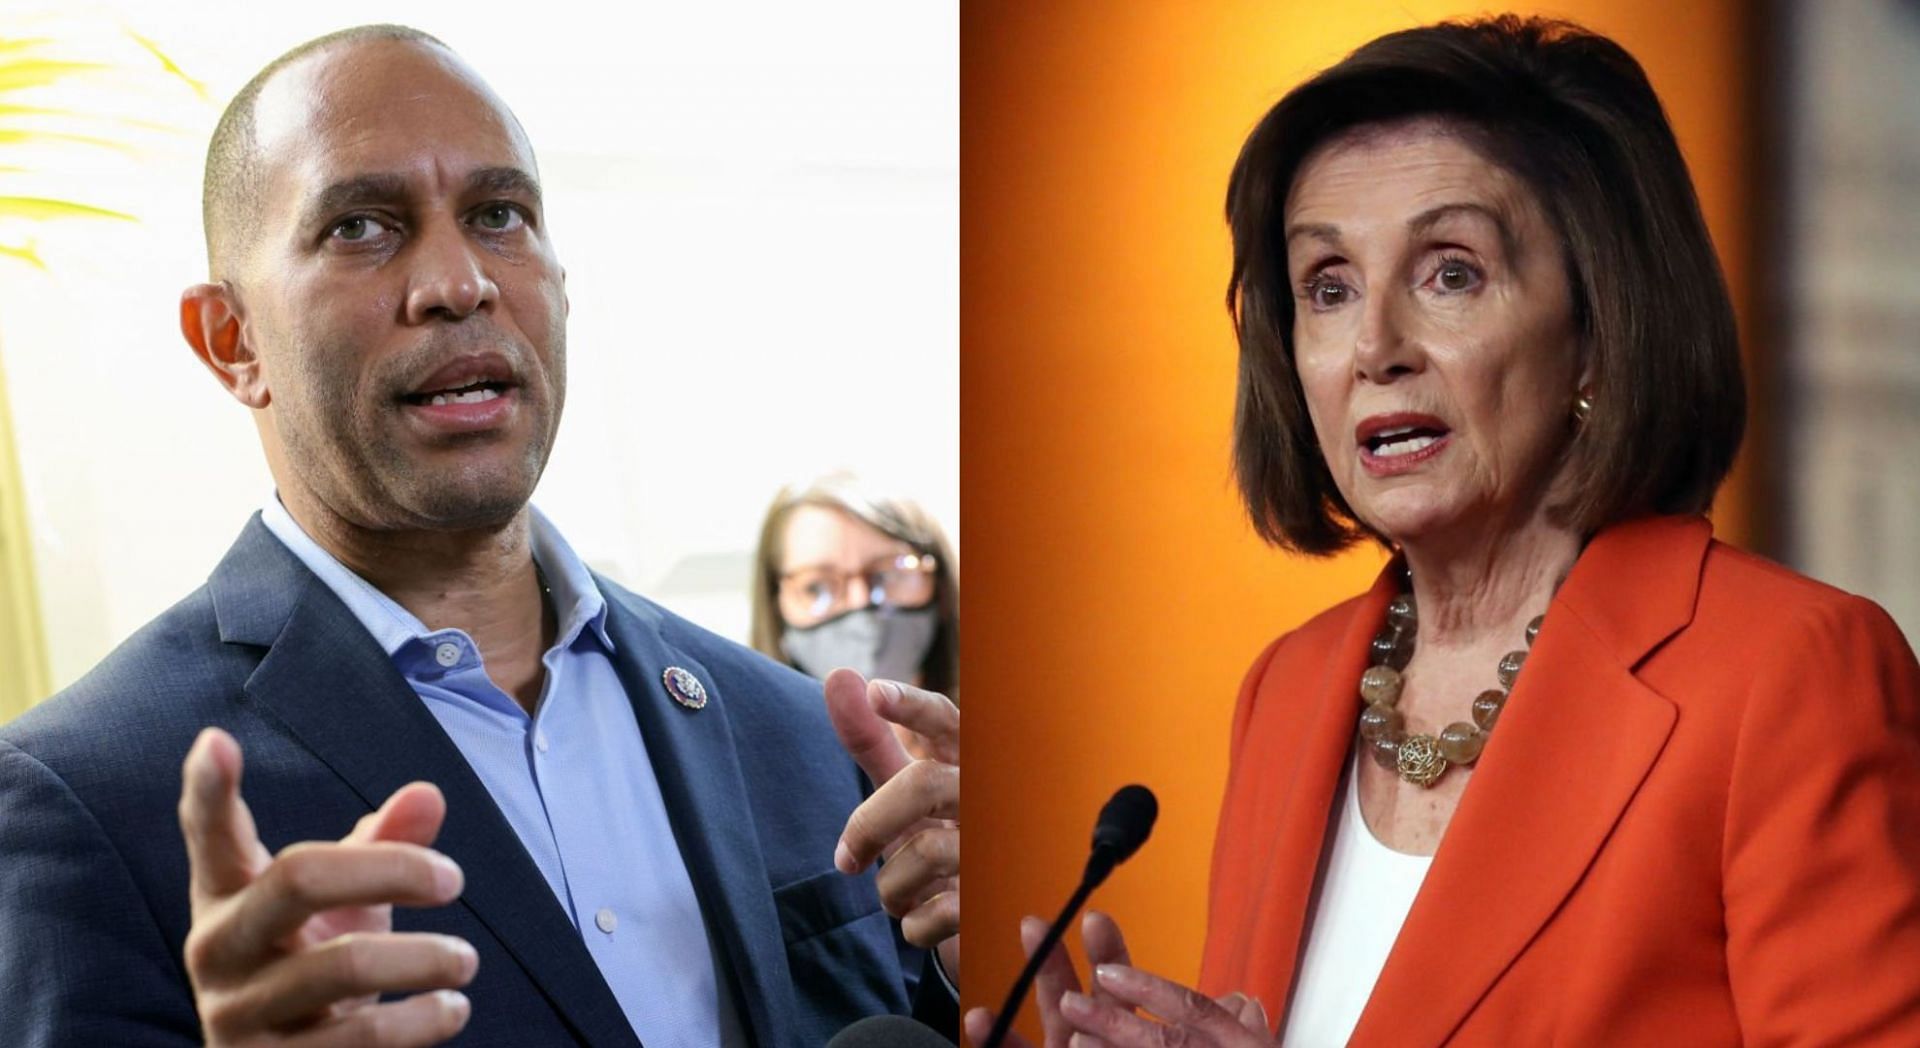 Hakeem Jeffries is reportedly being favored to replace Nancy Pelosi as the next House Speaker (Image via Getty Images)